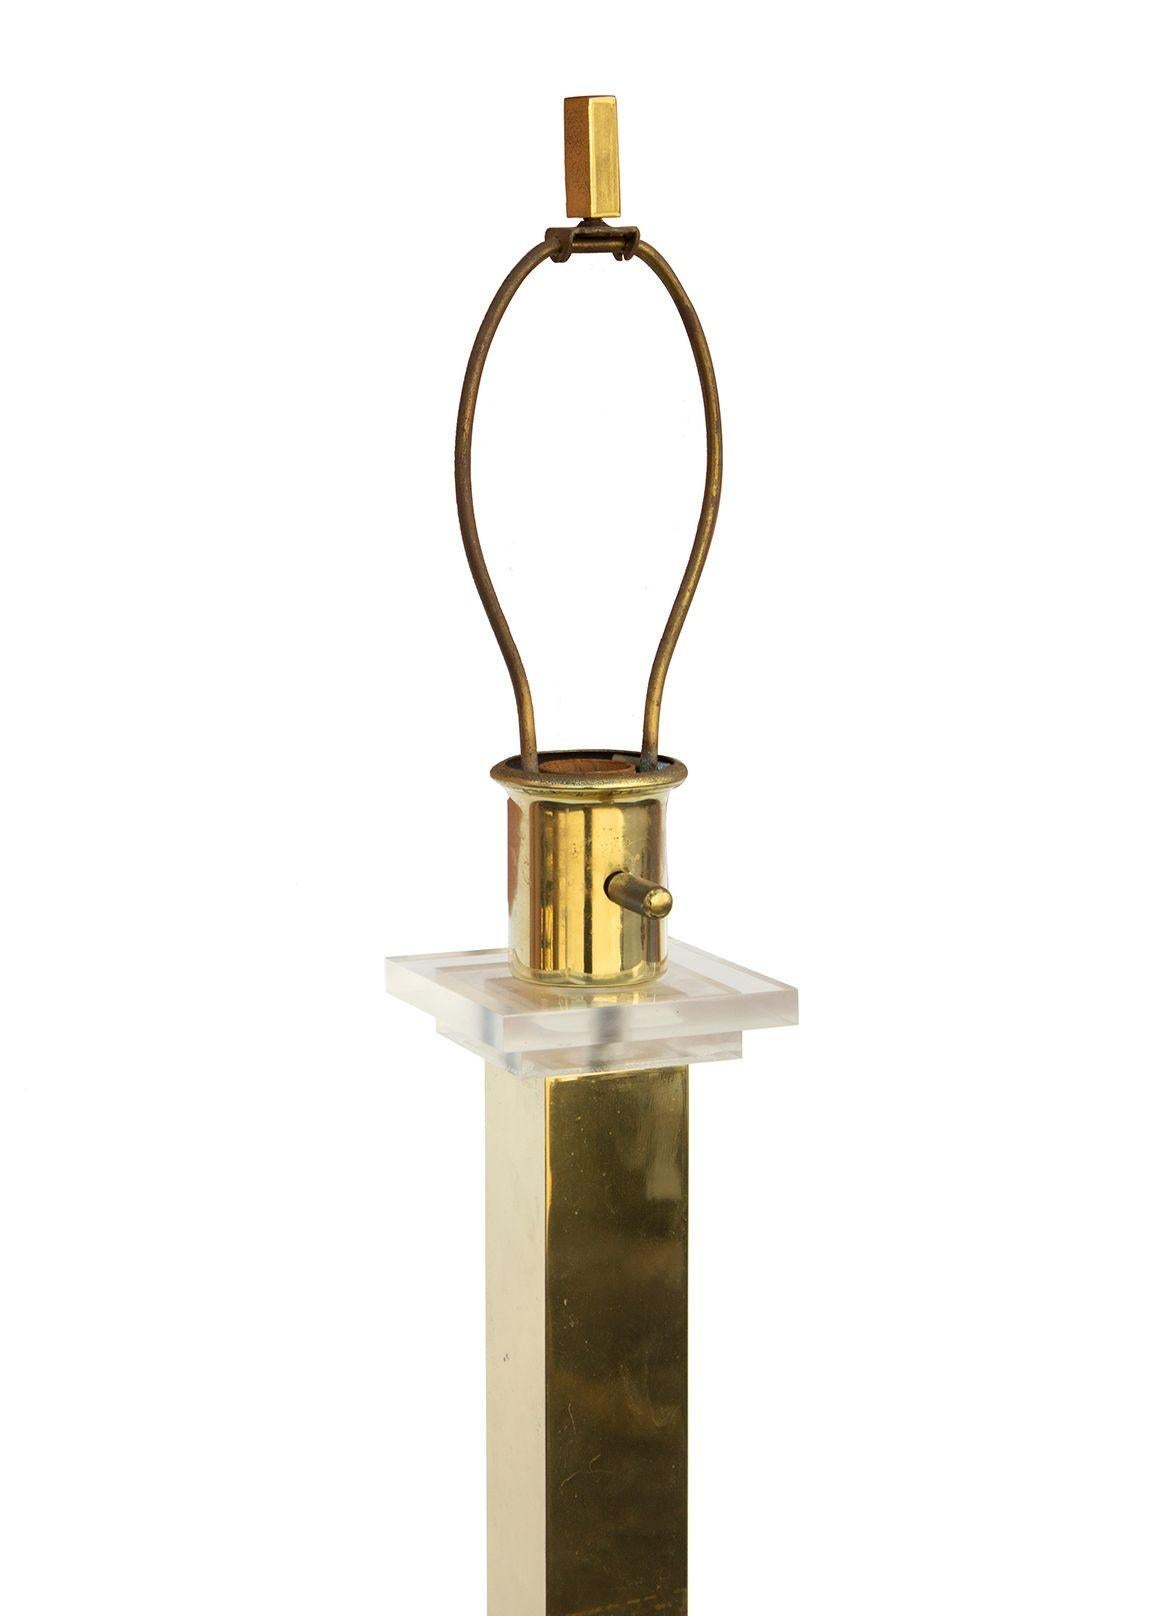 USA, 1980s
Geometric lucite and brass floor lamp. Weighted base, stacked square lucite details. No maker's marks. 
Condition notes: Some oxidation to the brass, slight marks to the finish. Original wiring is in working condition. 
Dimensions: